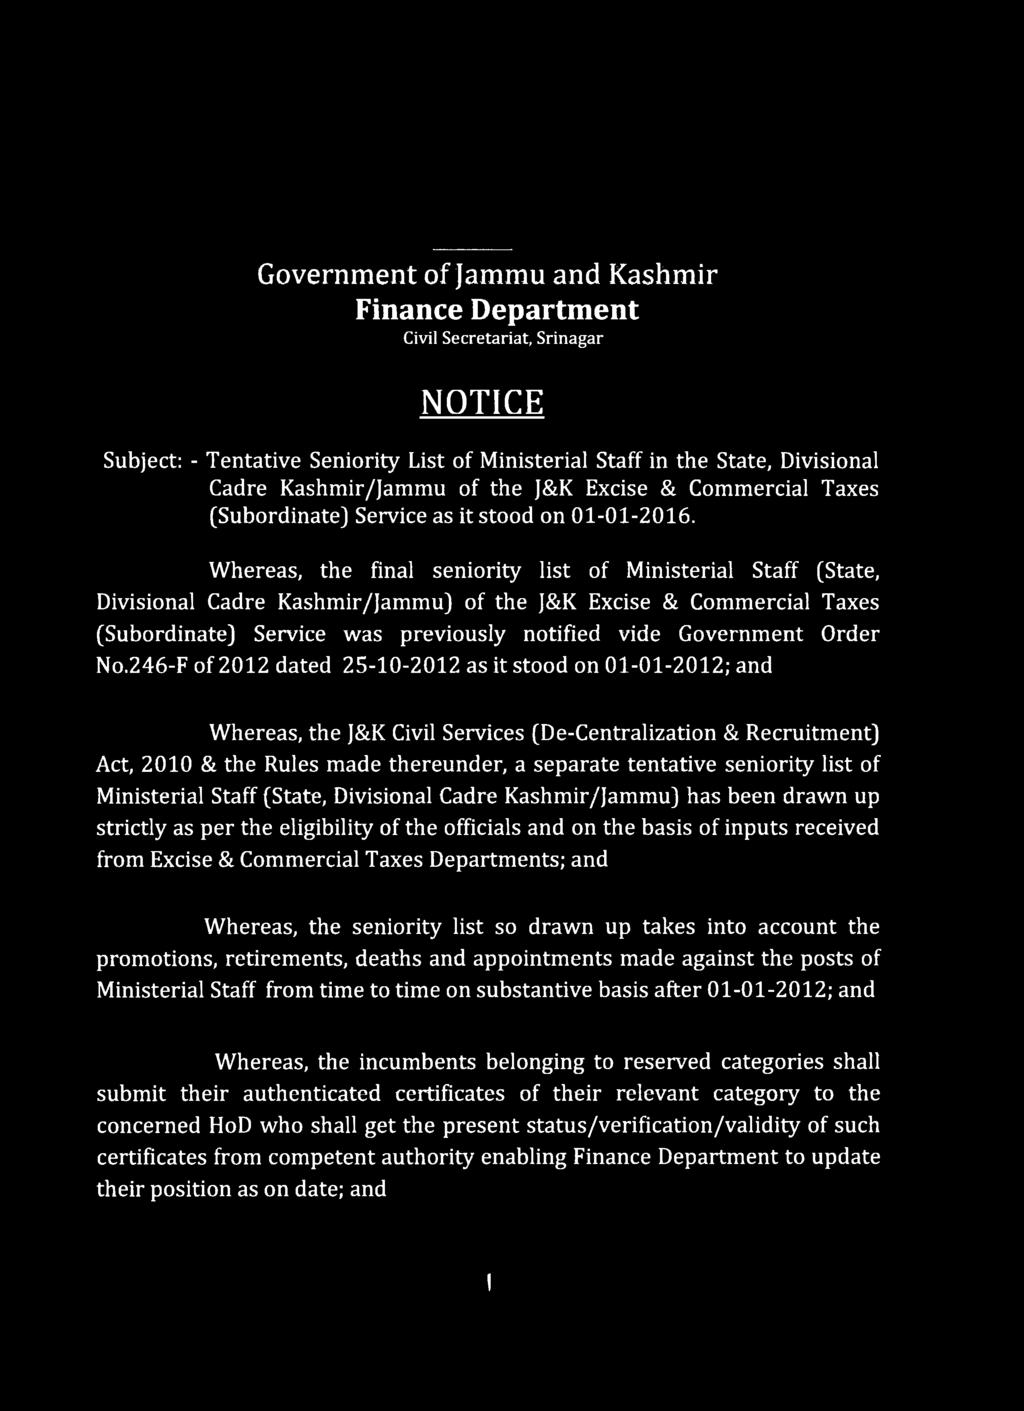 Whereas, the final seniority list of Ministerial Staff (State, Divisional Cadre Kashmir/Jammu) of the J&K Excise & Commercial Taxes (Subordinate) Service was previously notified vide Government Order